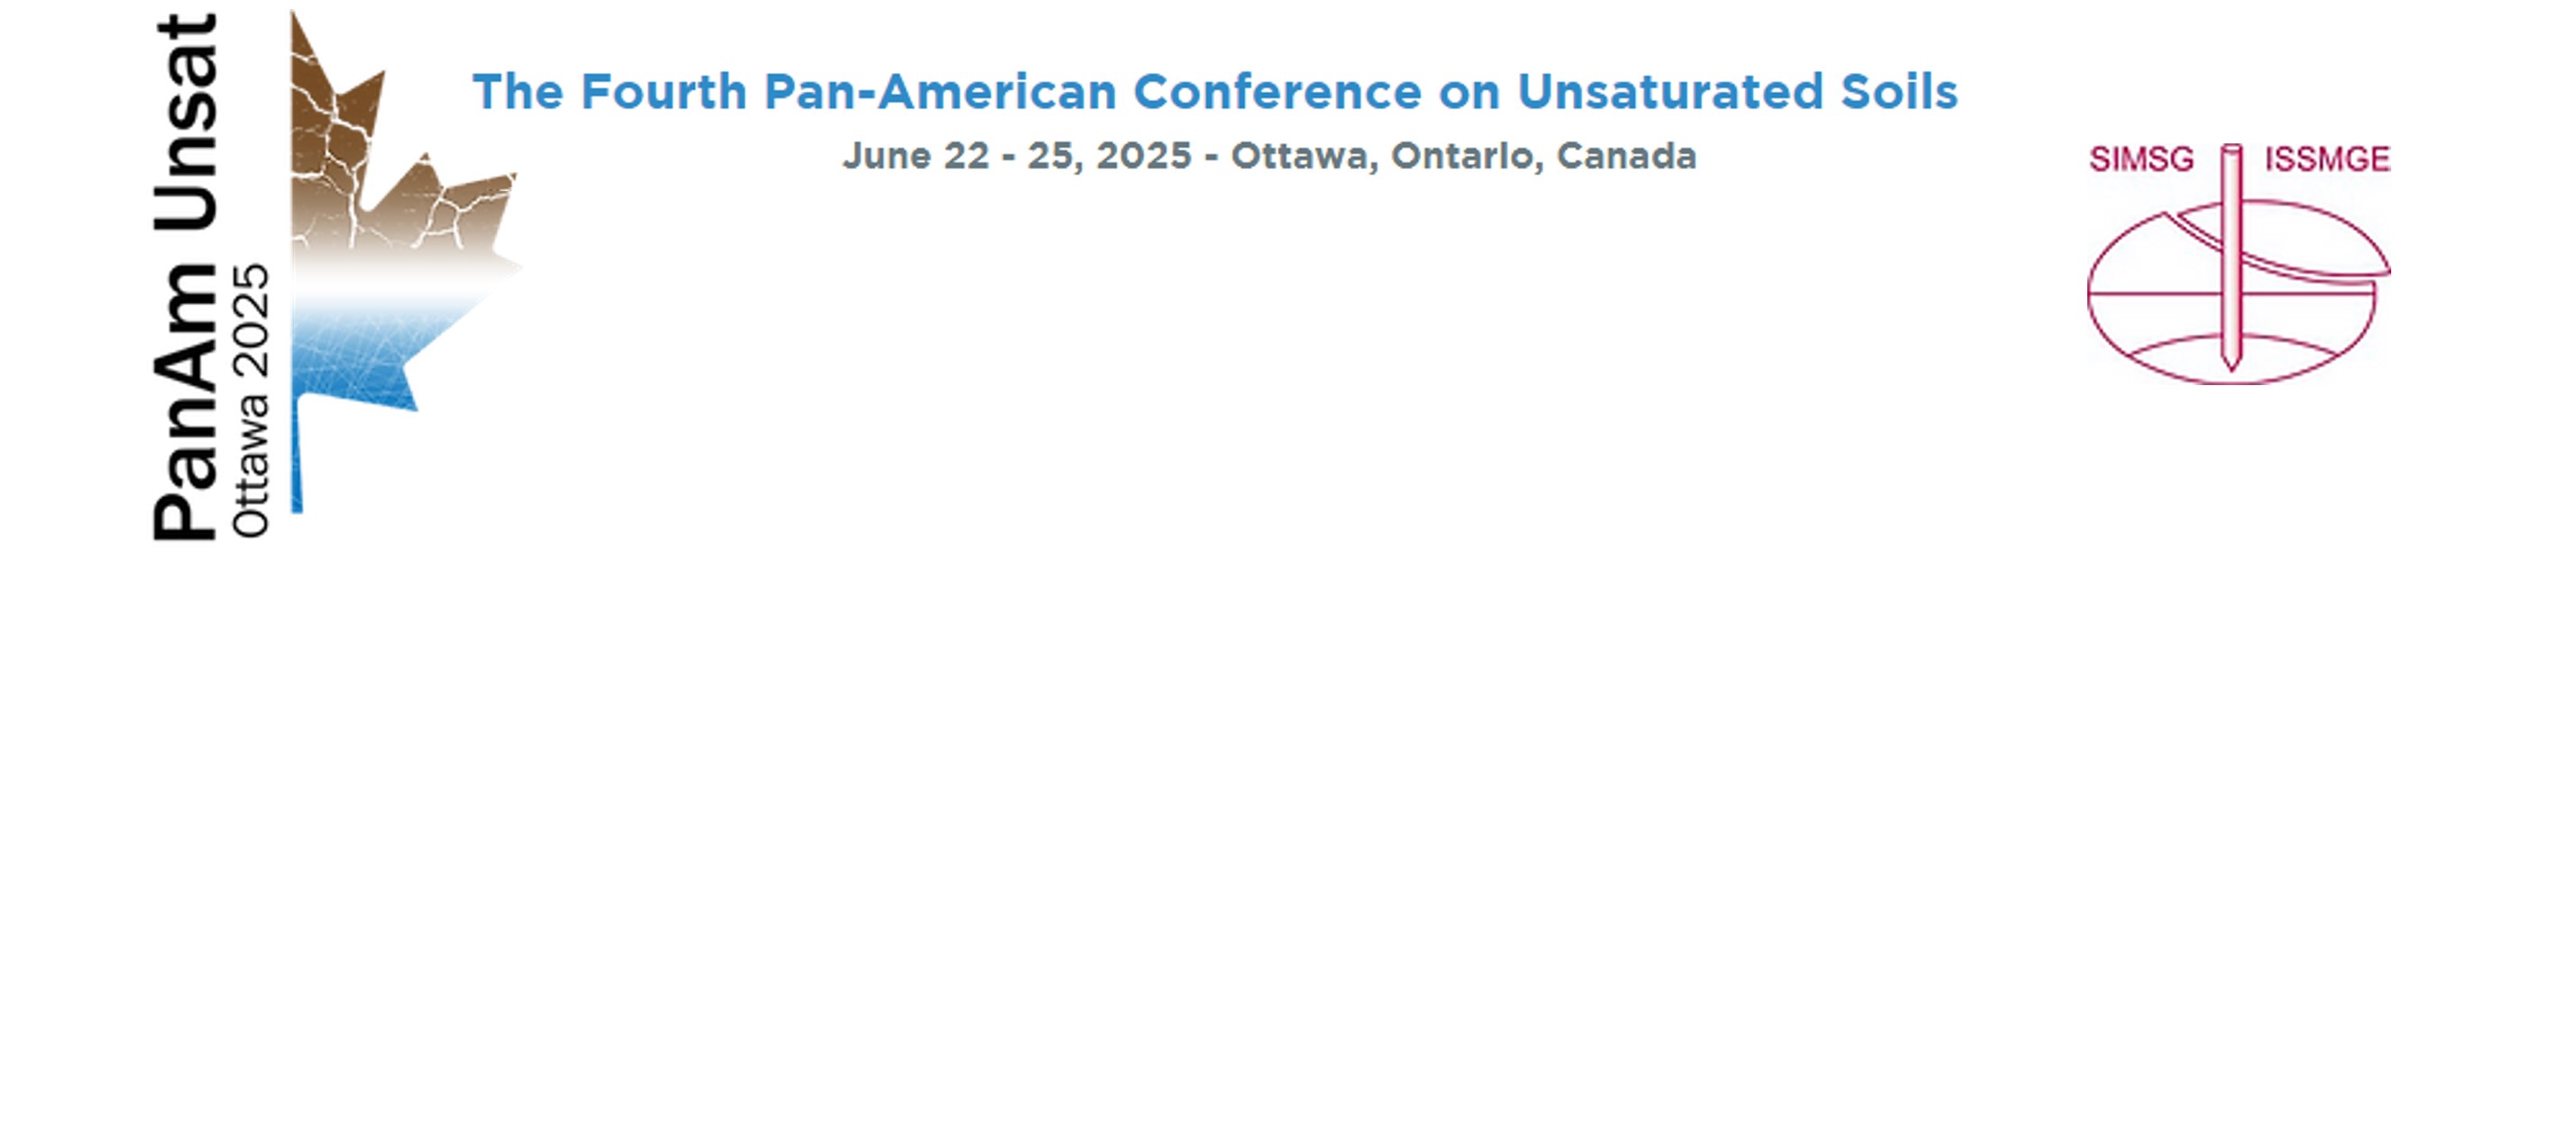 The Fourth Pan-American Conference on Unsaturated Soils